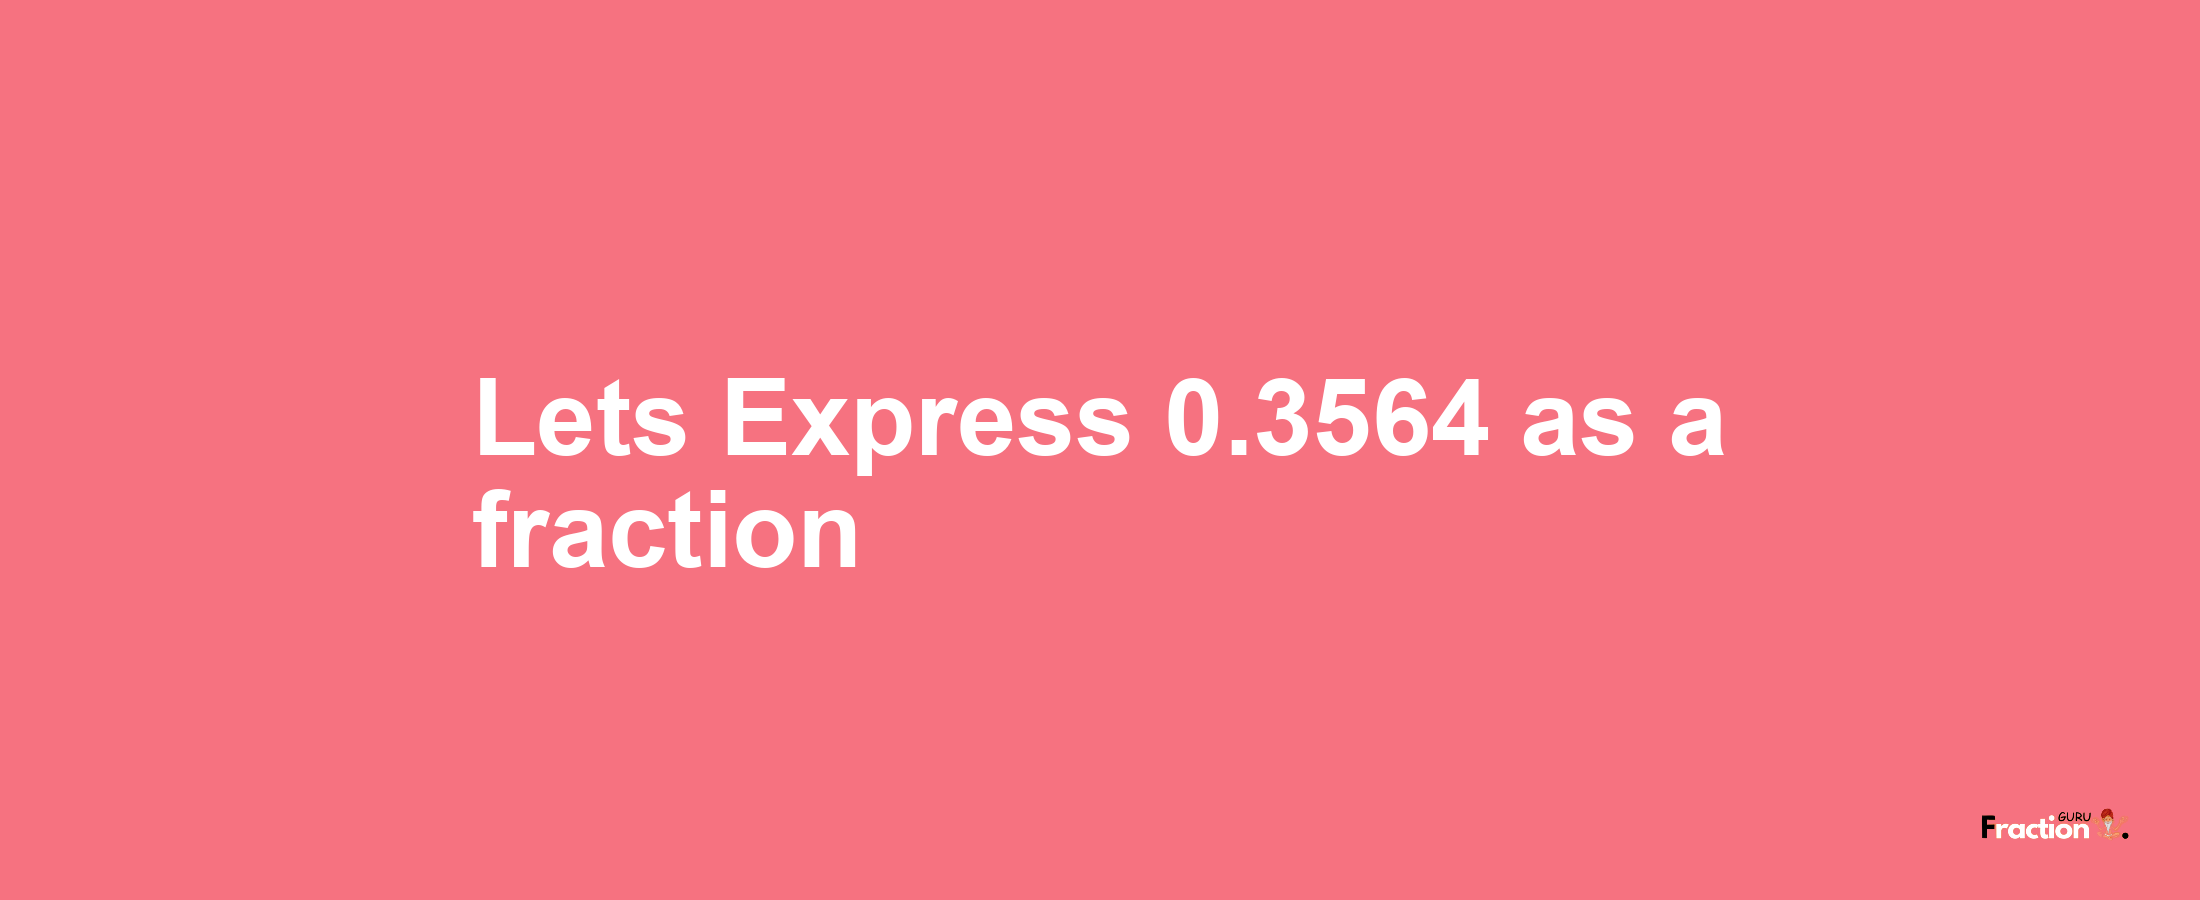 Lets Express 0.3564 as afraction